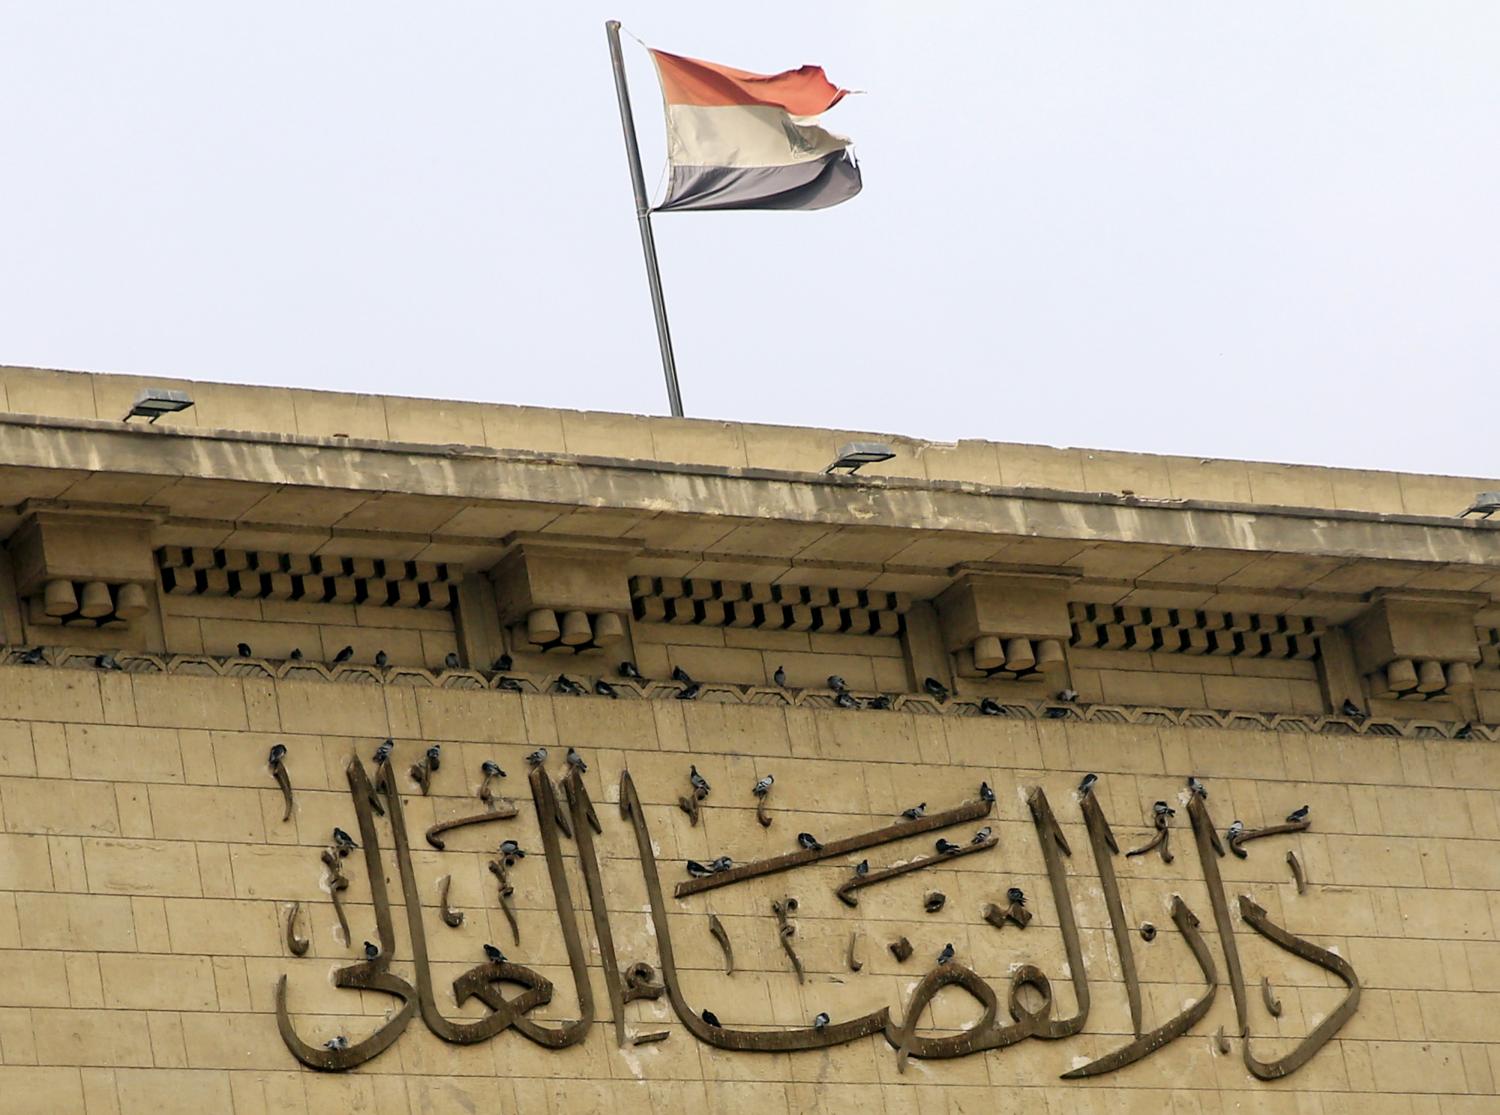 Pigeons are seen on the wall of the High Court where former Egyptian President Hosni Mubarak's trial will take place, in Cairo, Egypt, November 5, 2015. Egypt's top court on Thursday postponed the final trial of former Egyptian president Mubarak over the killing of protesters during the 2011 uprising that ended his 30-year rule. REUTERS/Amr Abdallah Dalsh